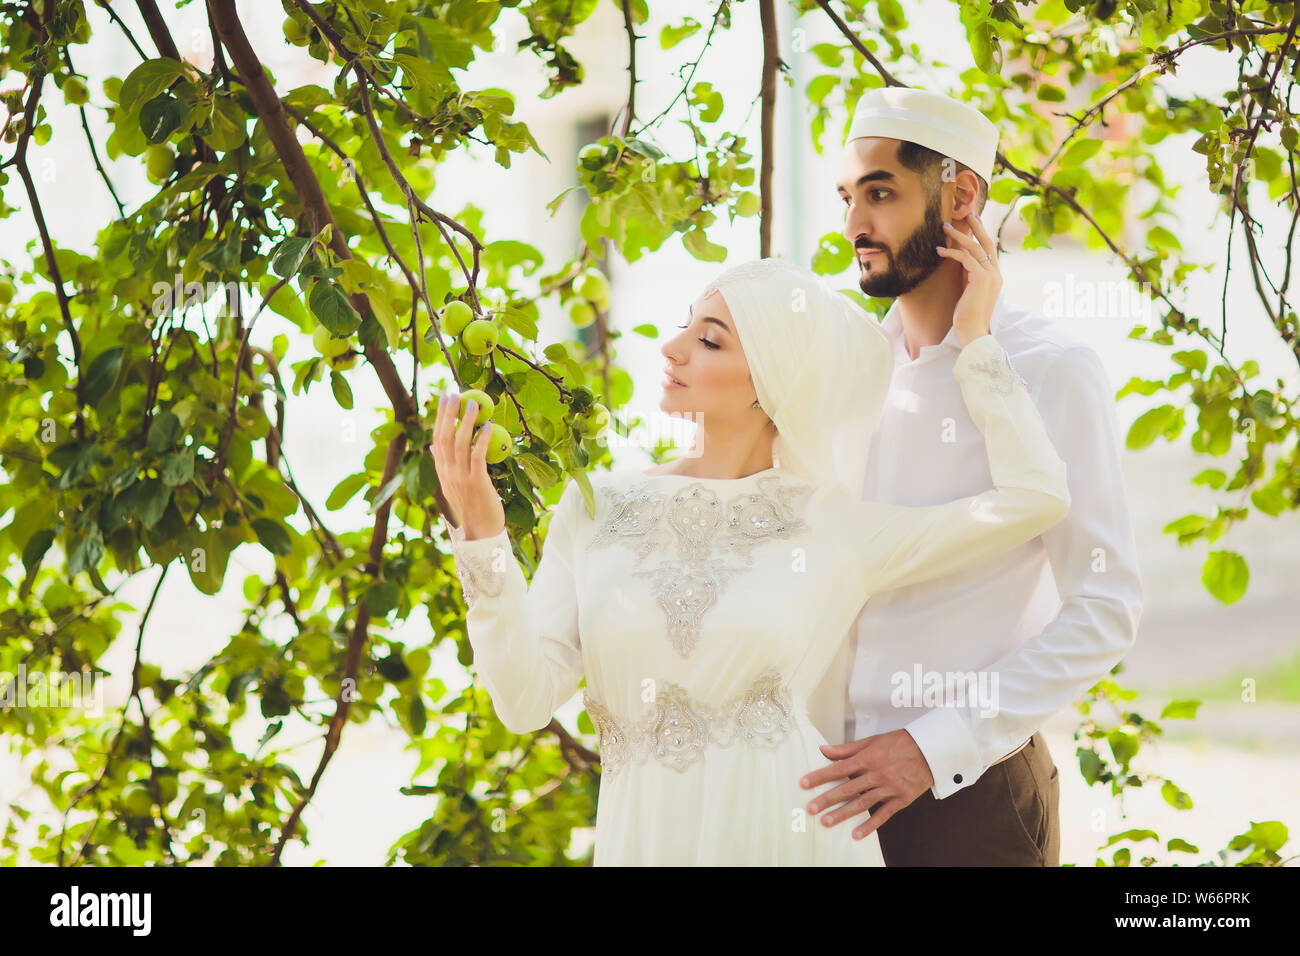 National wedding. Bride and groom. Wedding muslim couple during the marriage  ceremony. Muslim marriage Stock Photo - Alamy